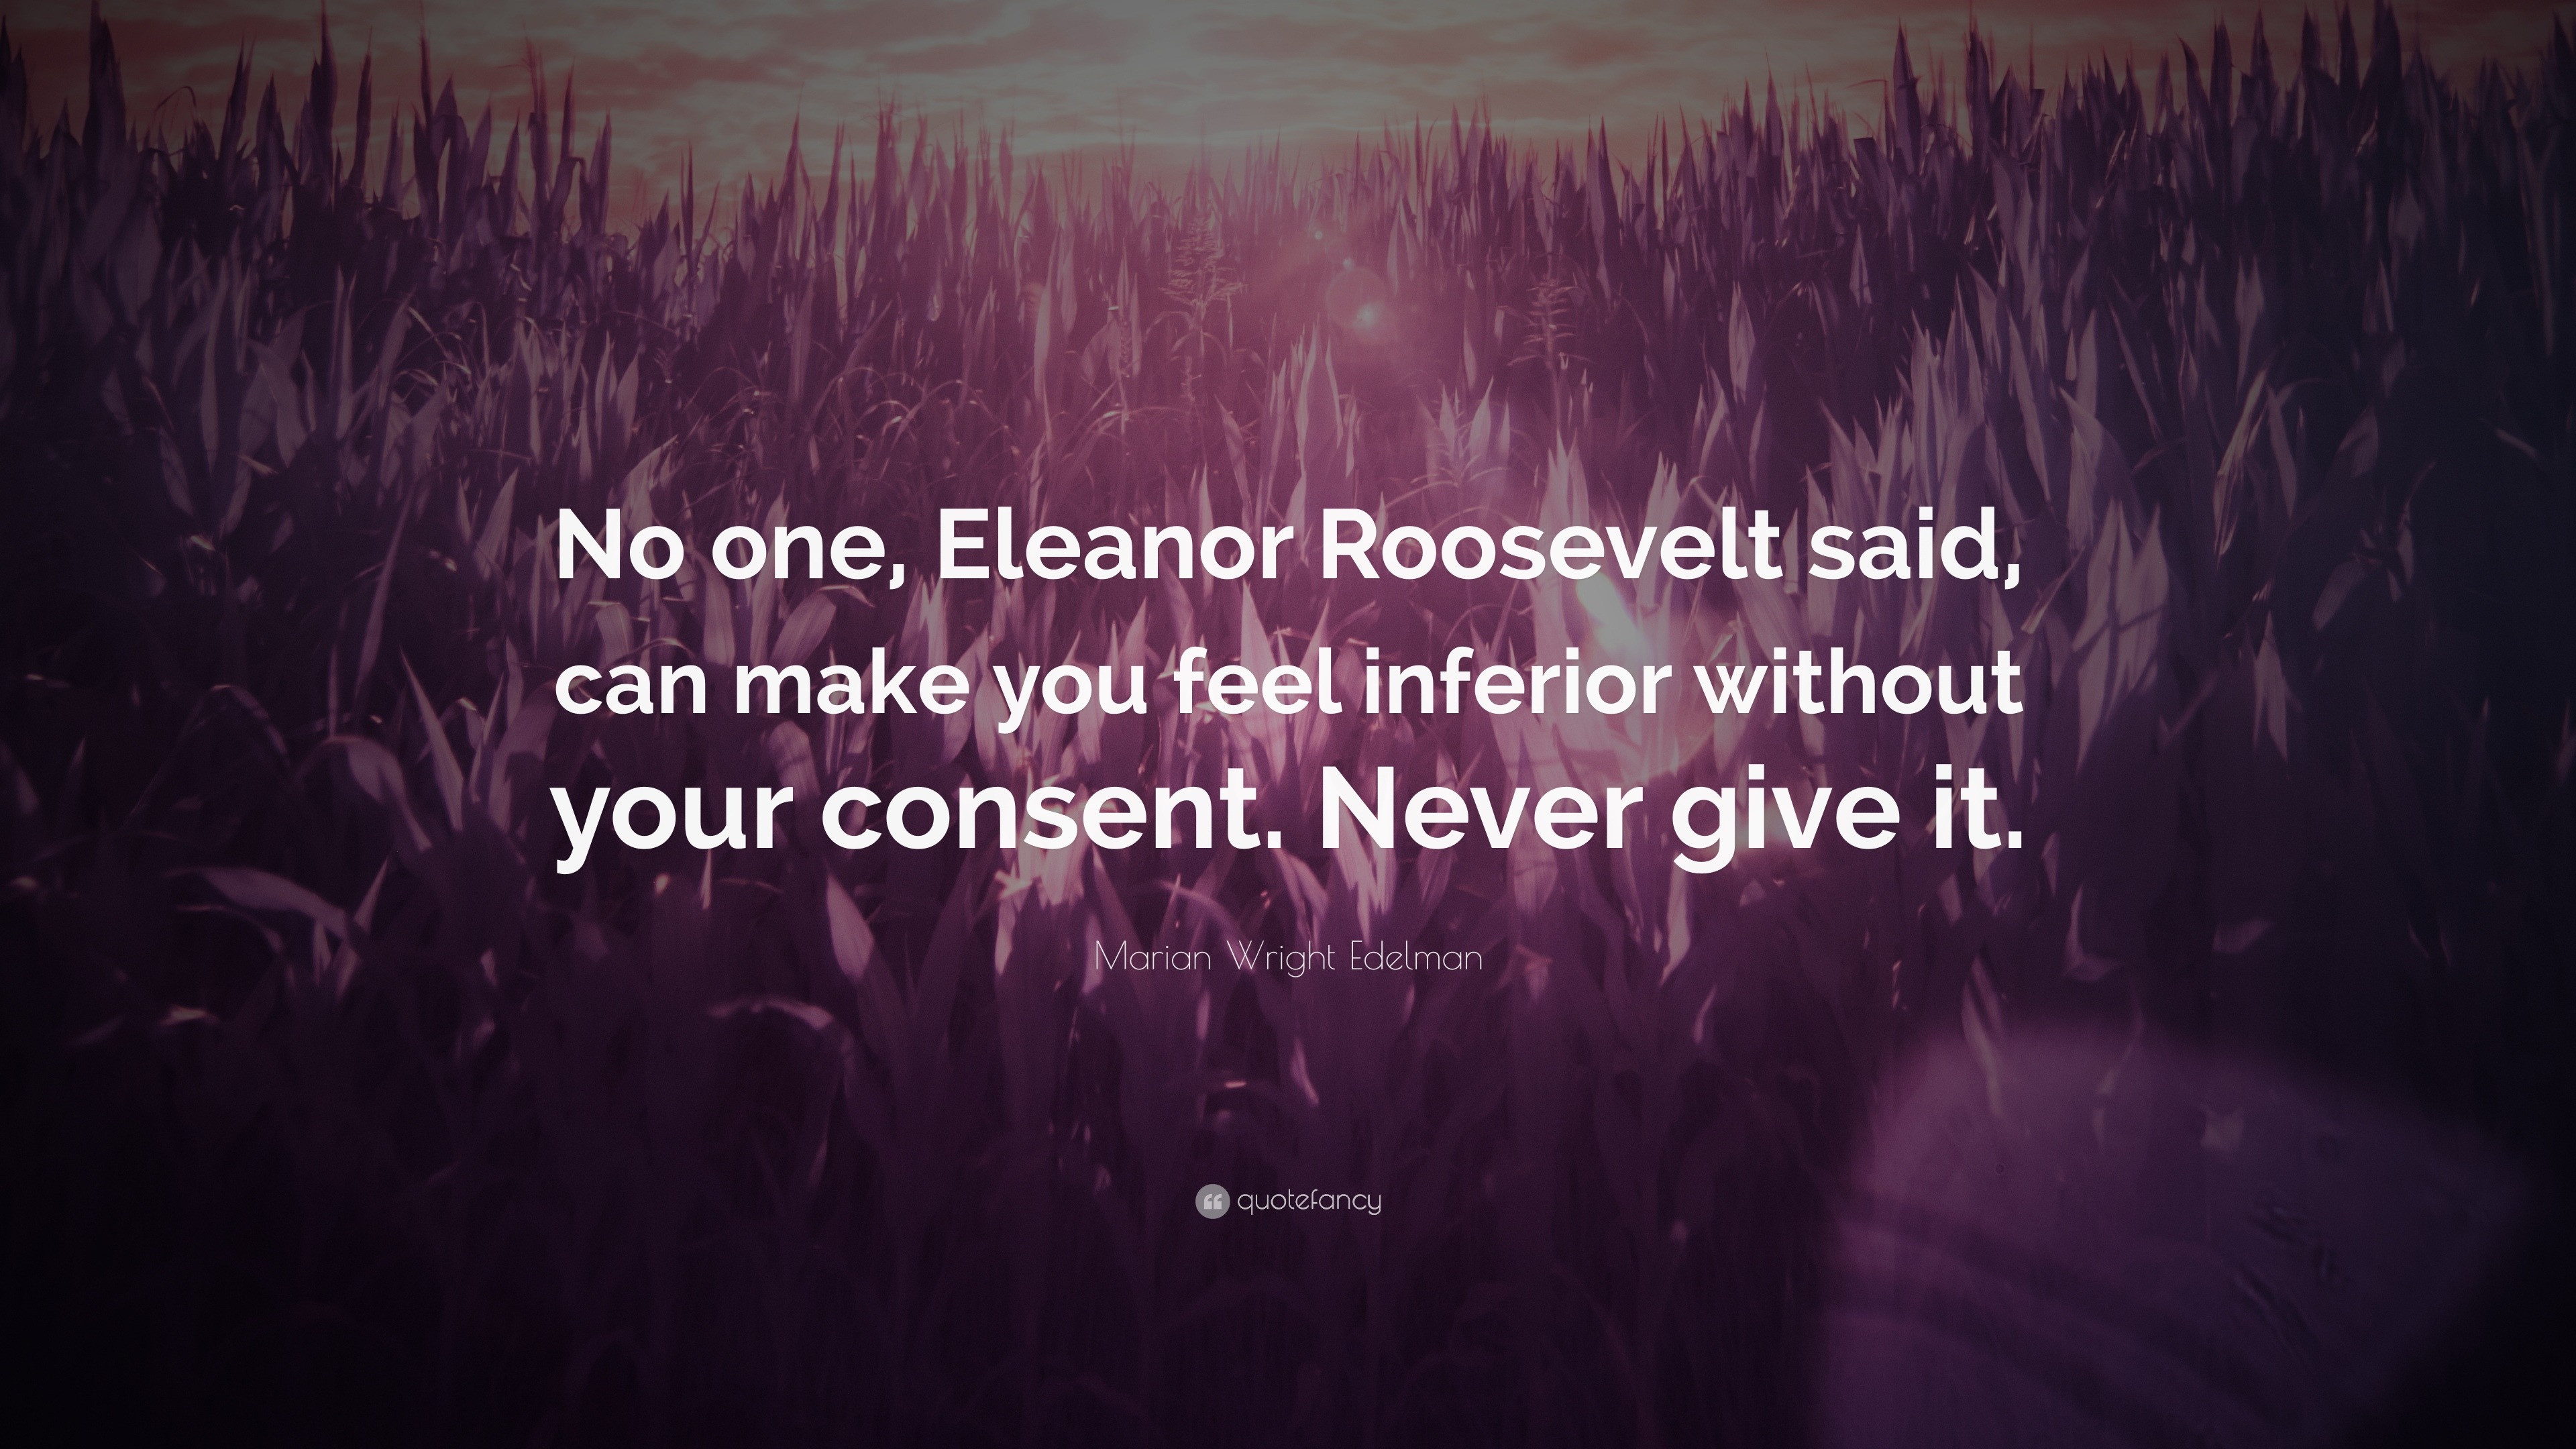 Marian Wright Edelman Quote No One Eleanor Roosevelt Said Can Make You Feel Inferior Without Your Consent Never Give It 7 Wallpapers Quotefancy